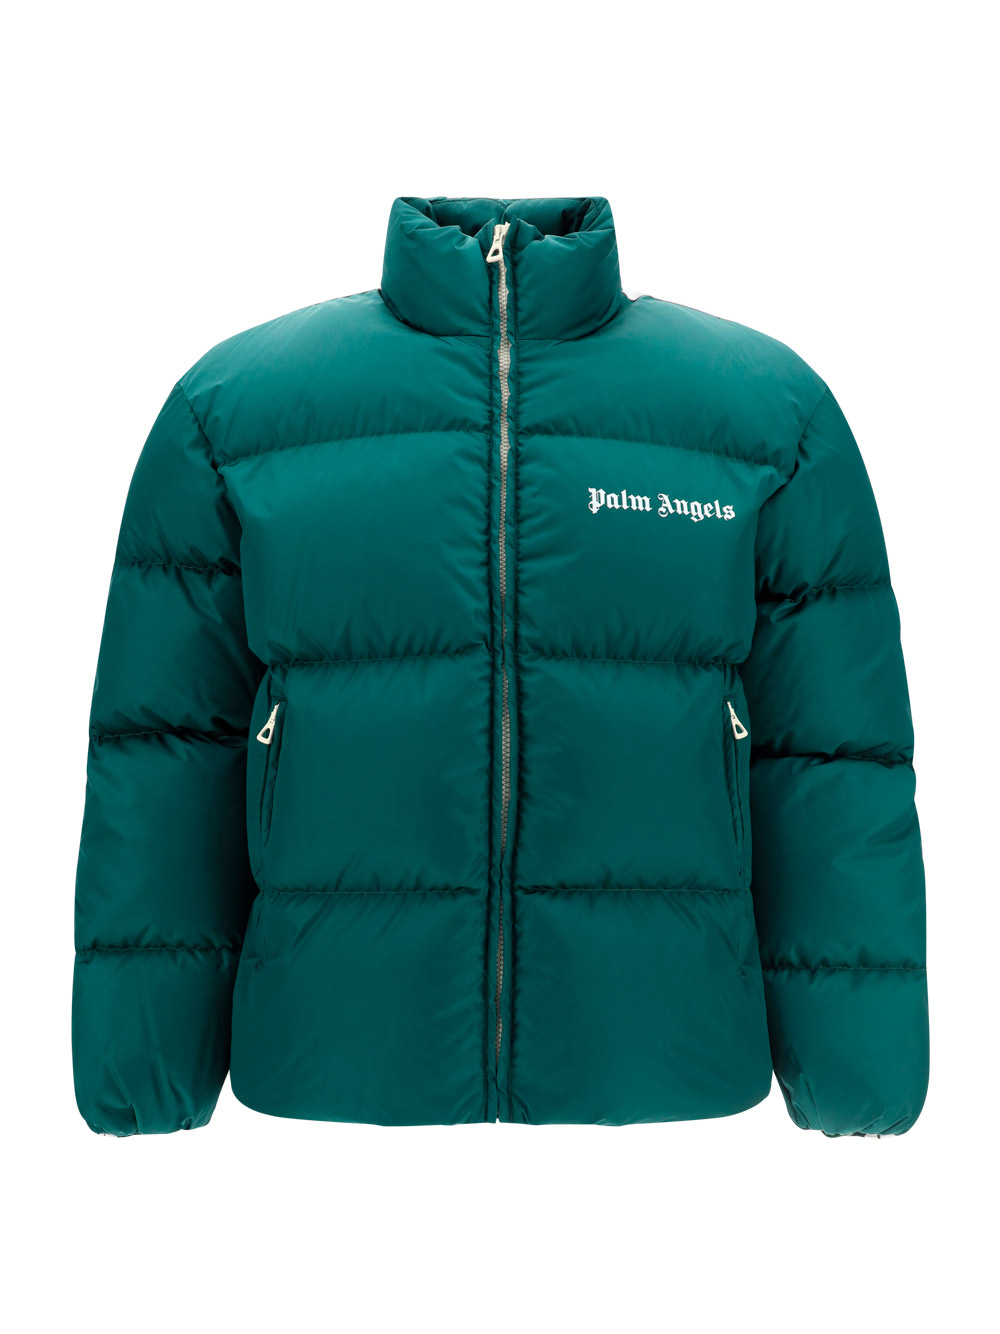 PALM ANGELS TRACK DOWN JACKET,PMED019C99FAB001_5501